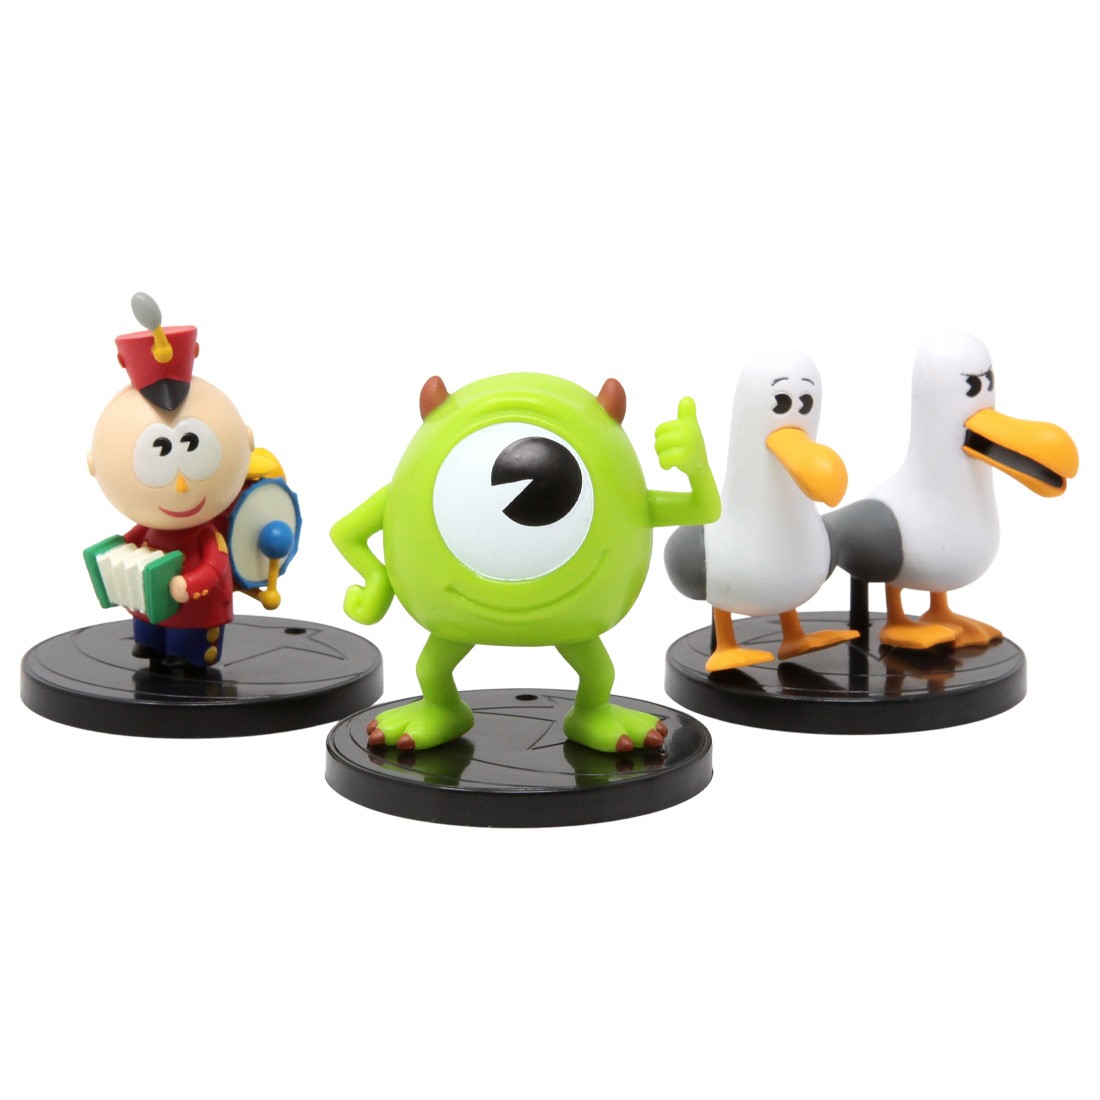 Move over, Angry Birds - Plants vs Zombies toys are on the way to